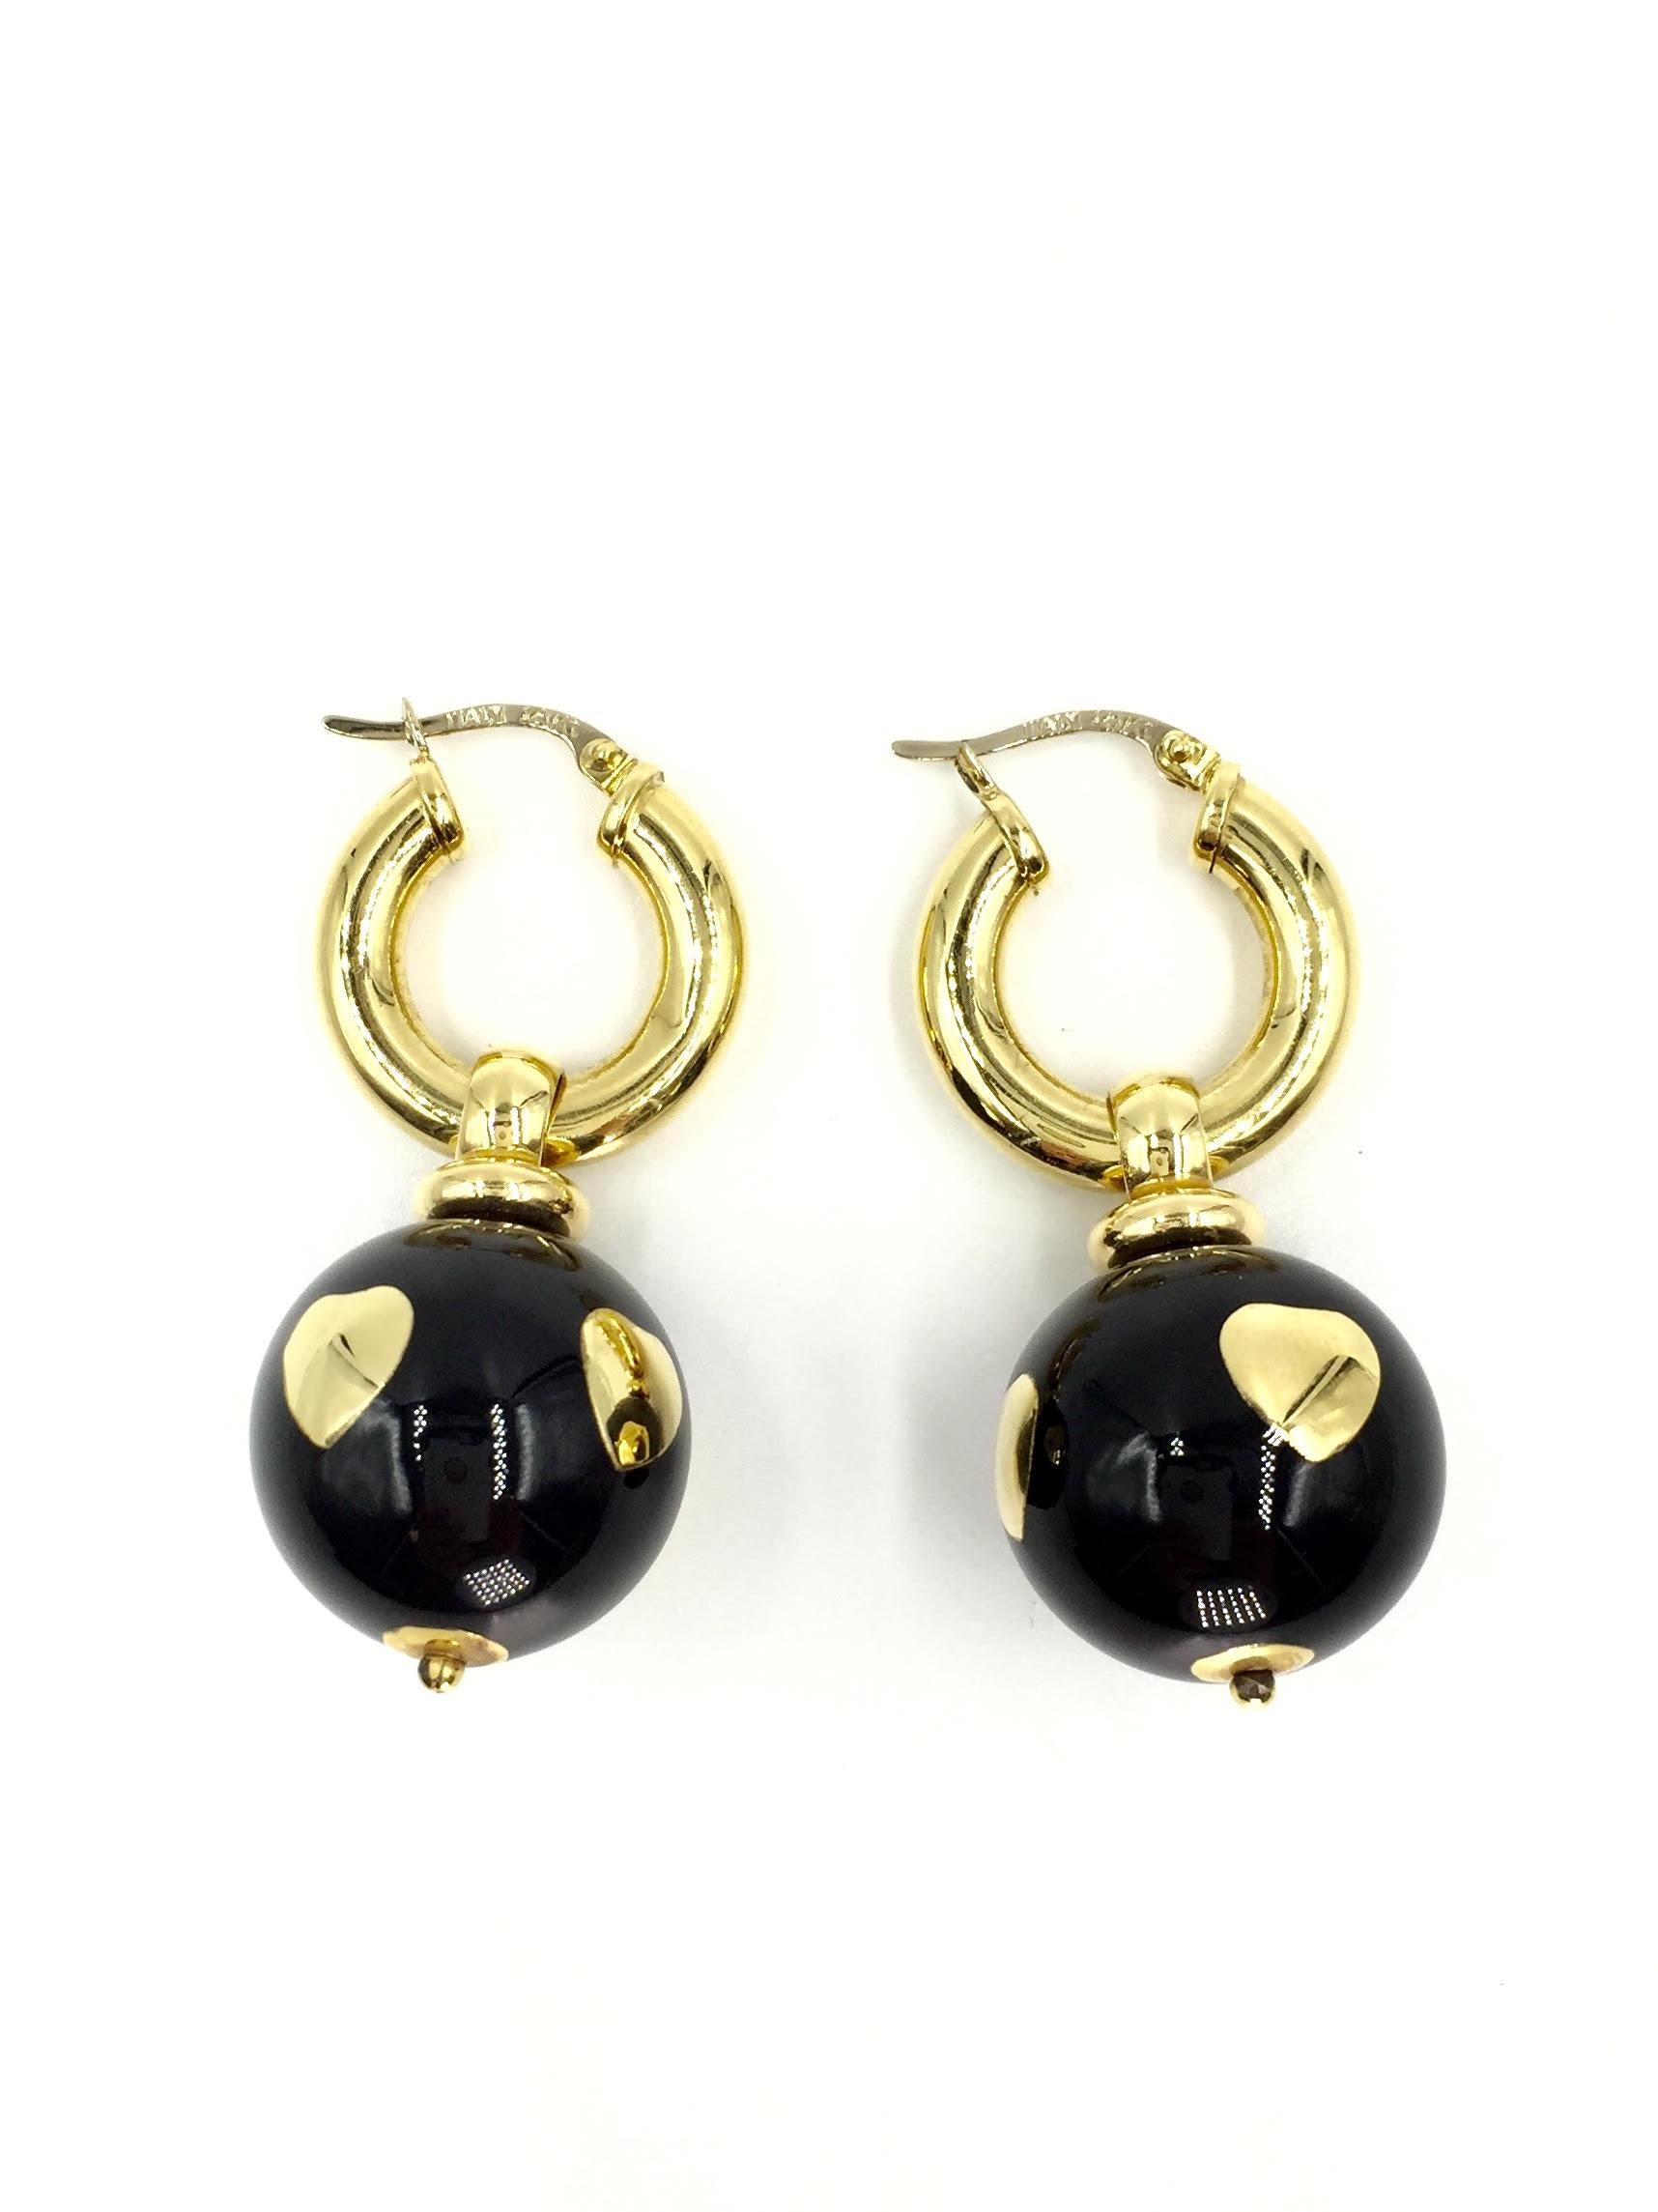 Vintage 18 Karat Gold Italian Made Black Enamel Ball Drop Earrings In Good Condition For Sale In Pikesville, MD